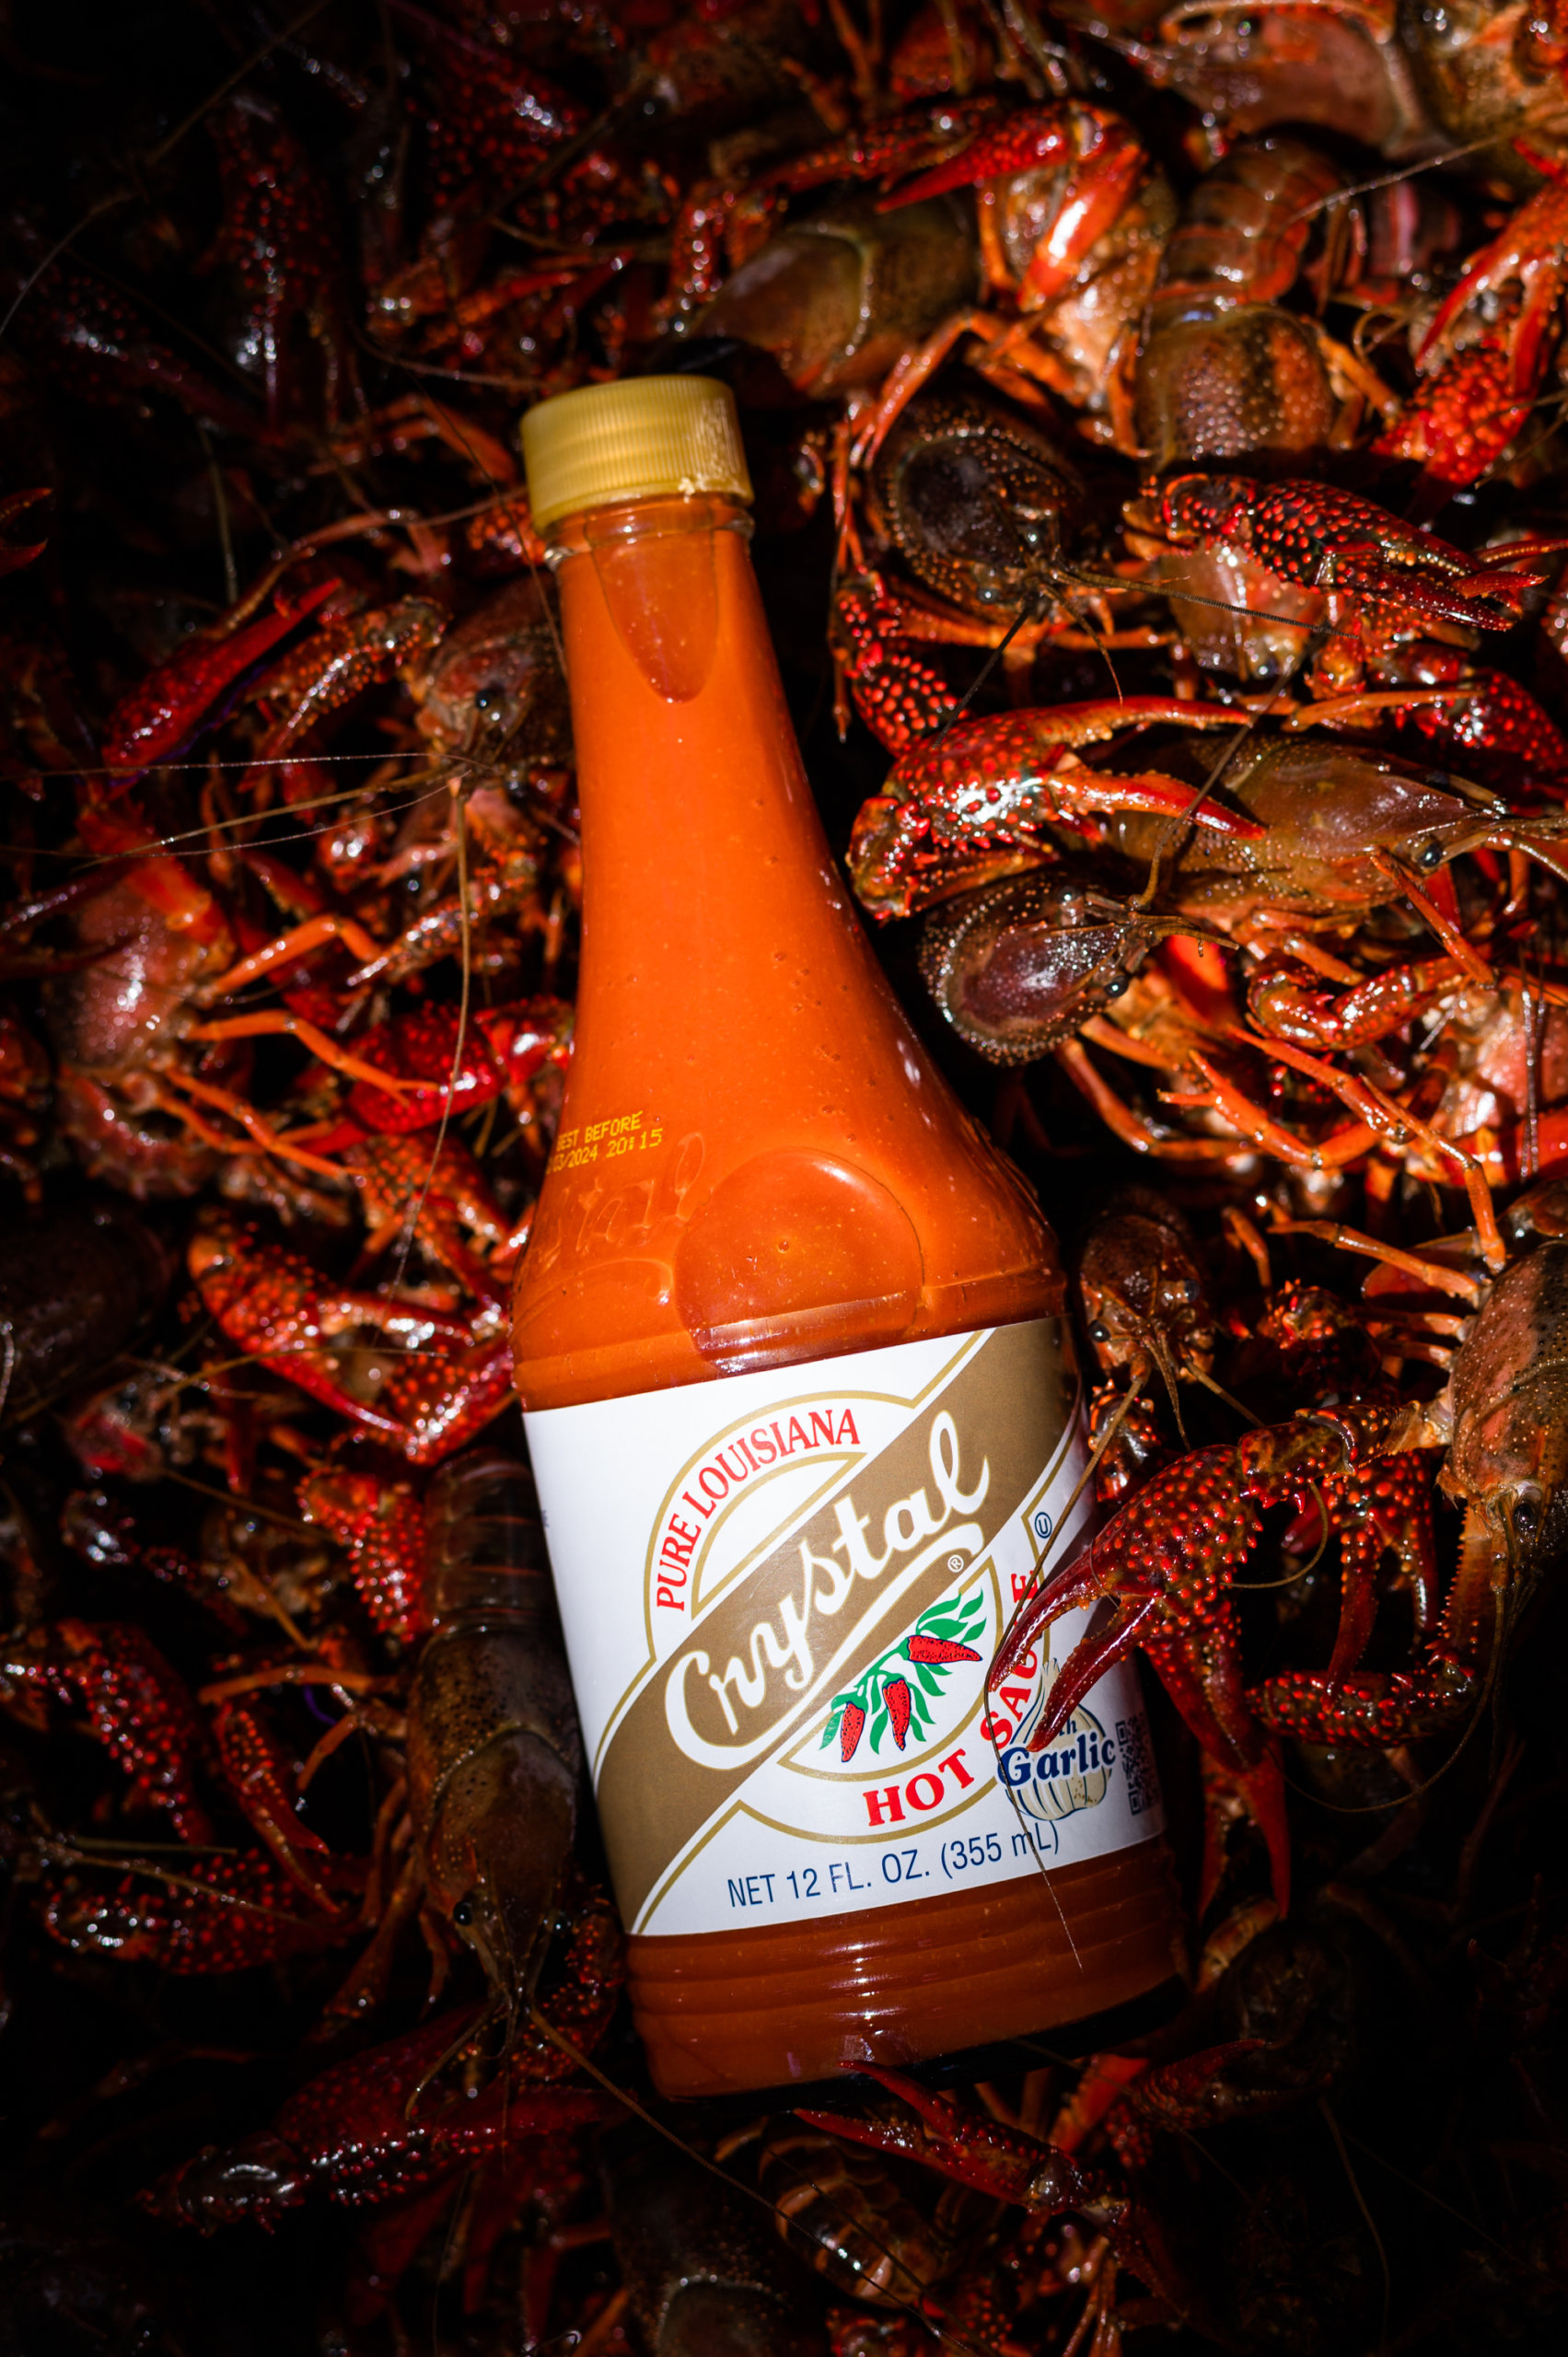 A bottle of Garlic Crystal Hot Sauce on top of live crawfish